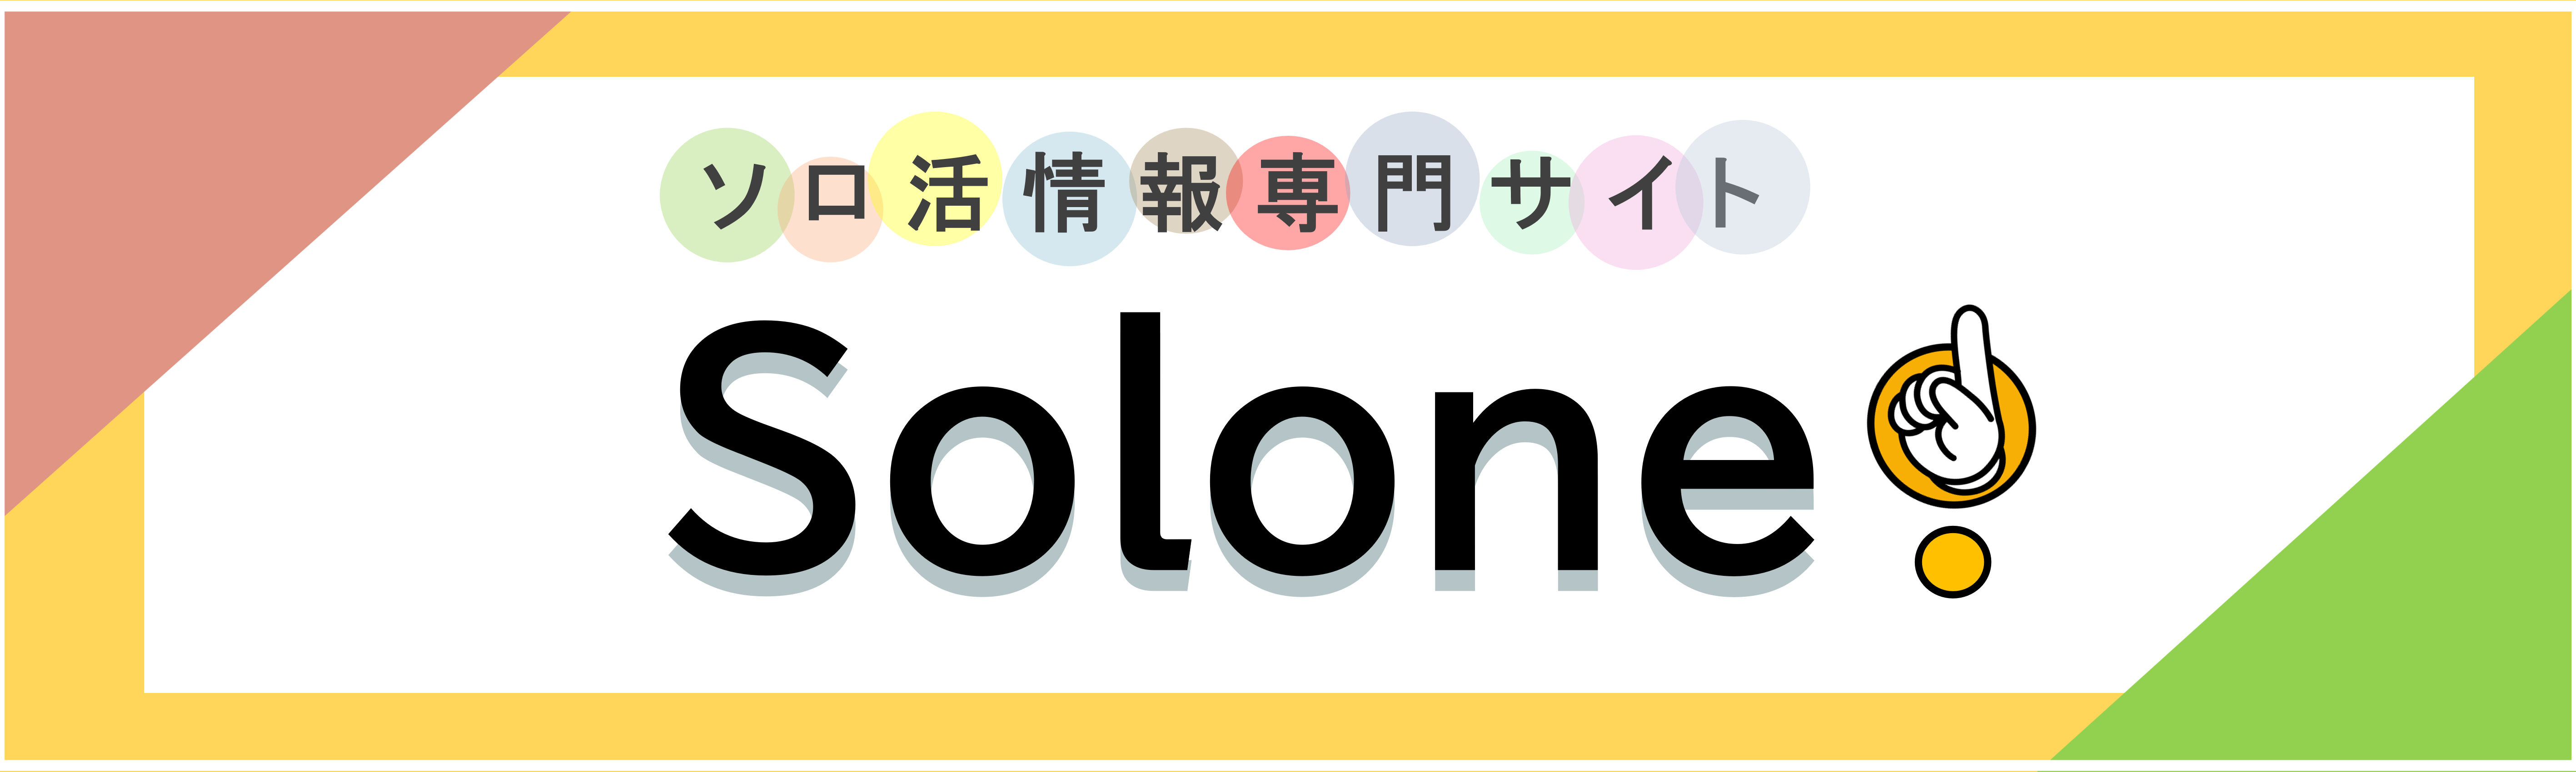 Solone（ソローン）